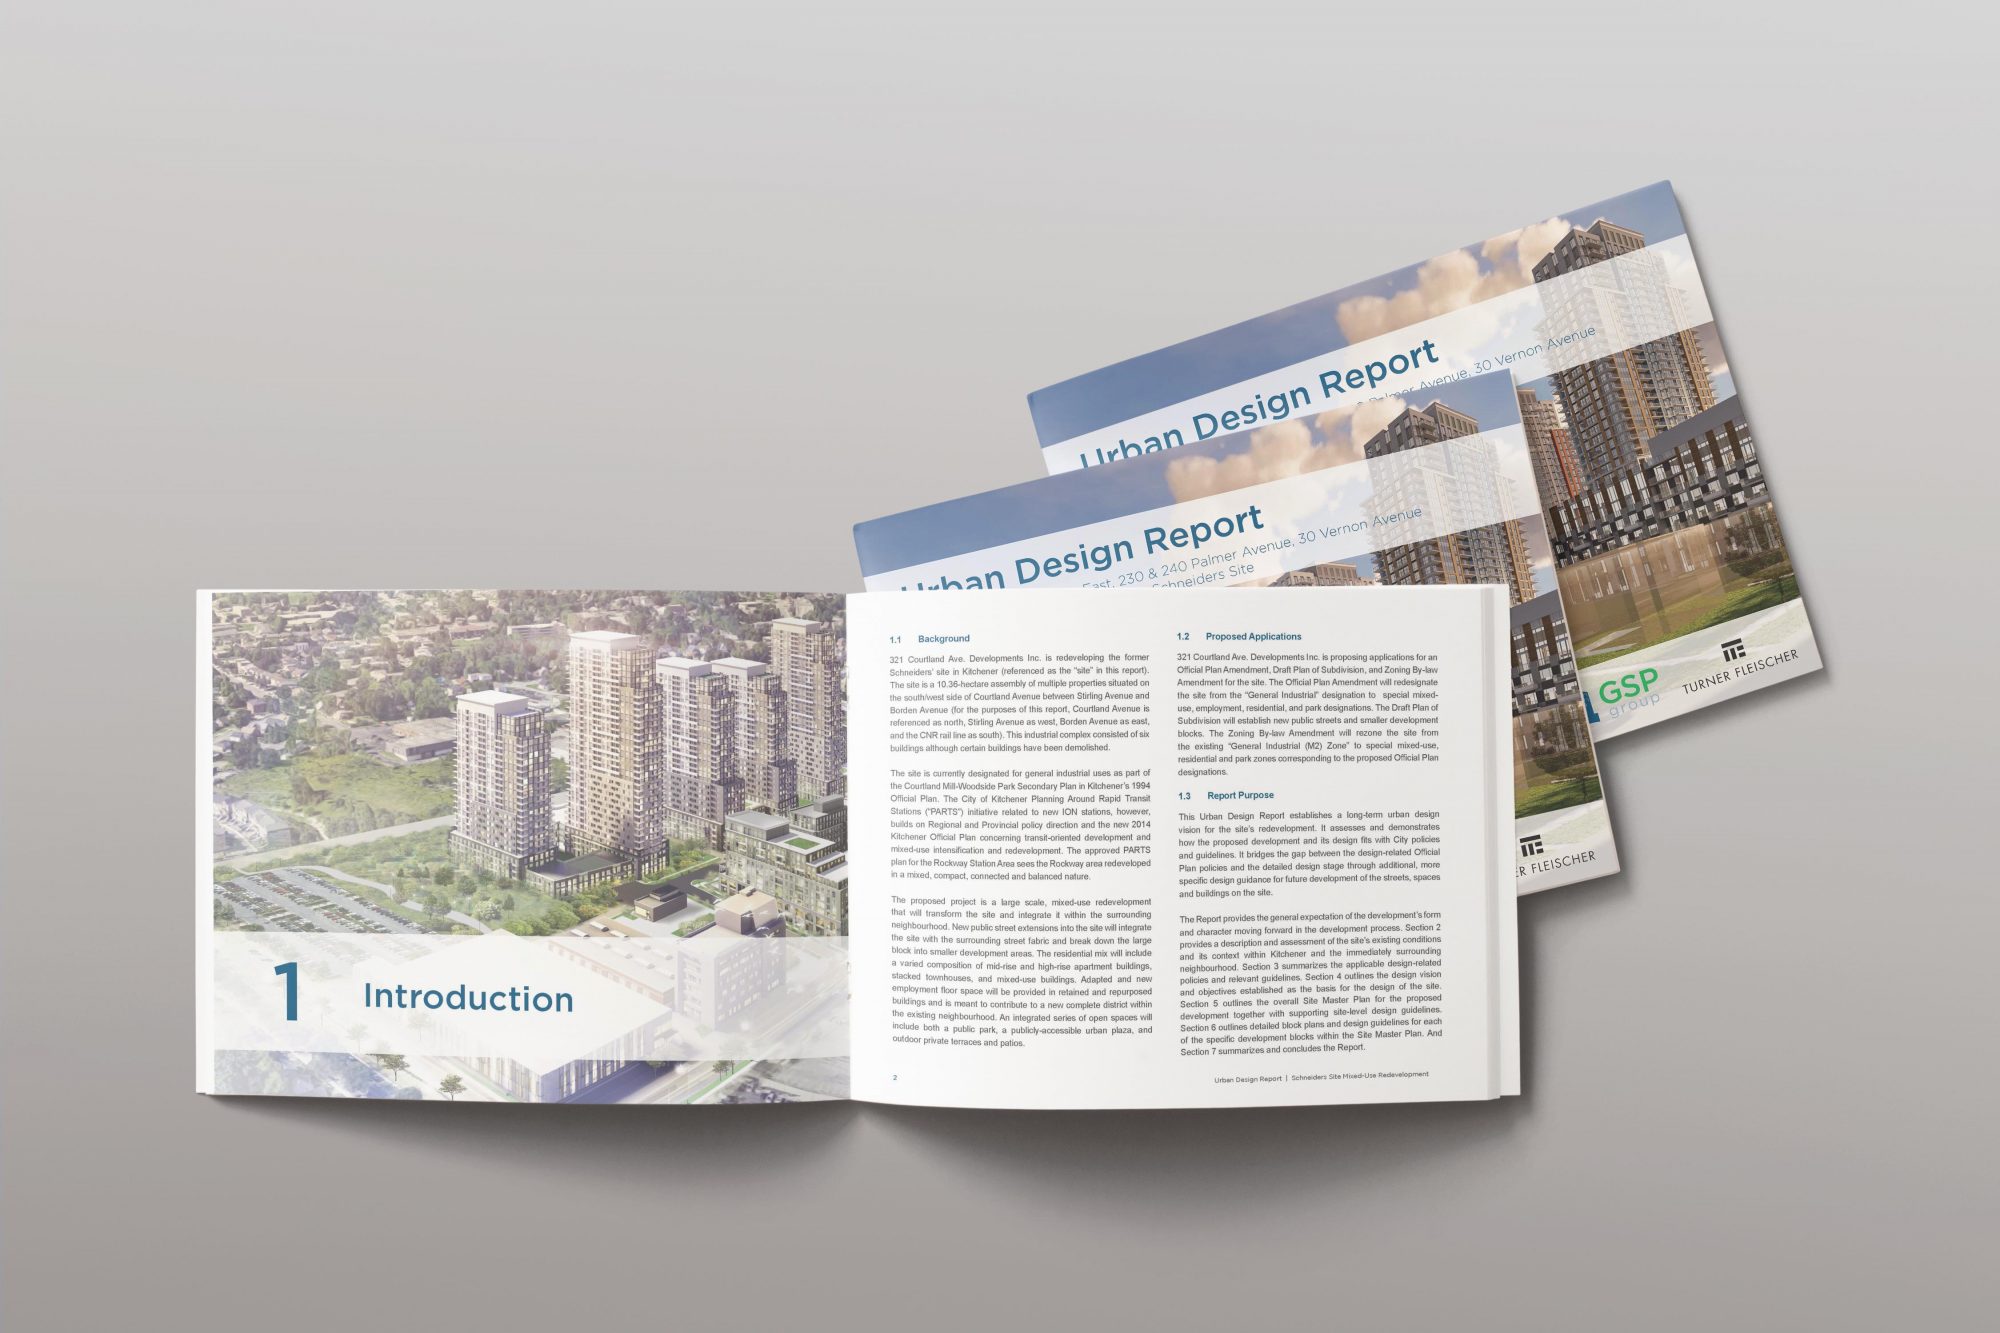 A report is open to the introduction page. This report is sitting on top of two identical reports that have “Urban Design Report” written across the cover.